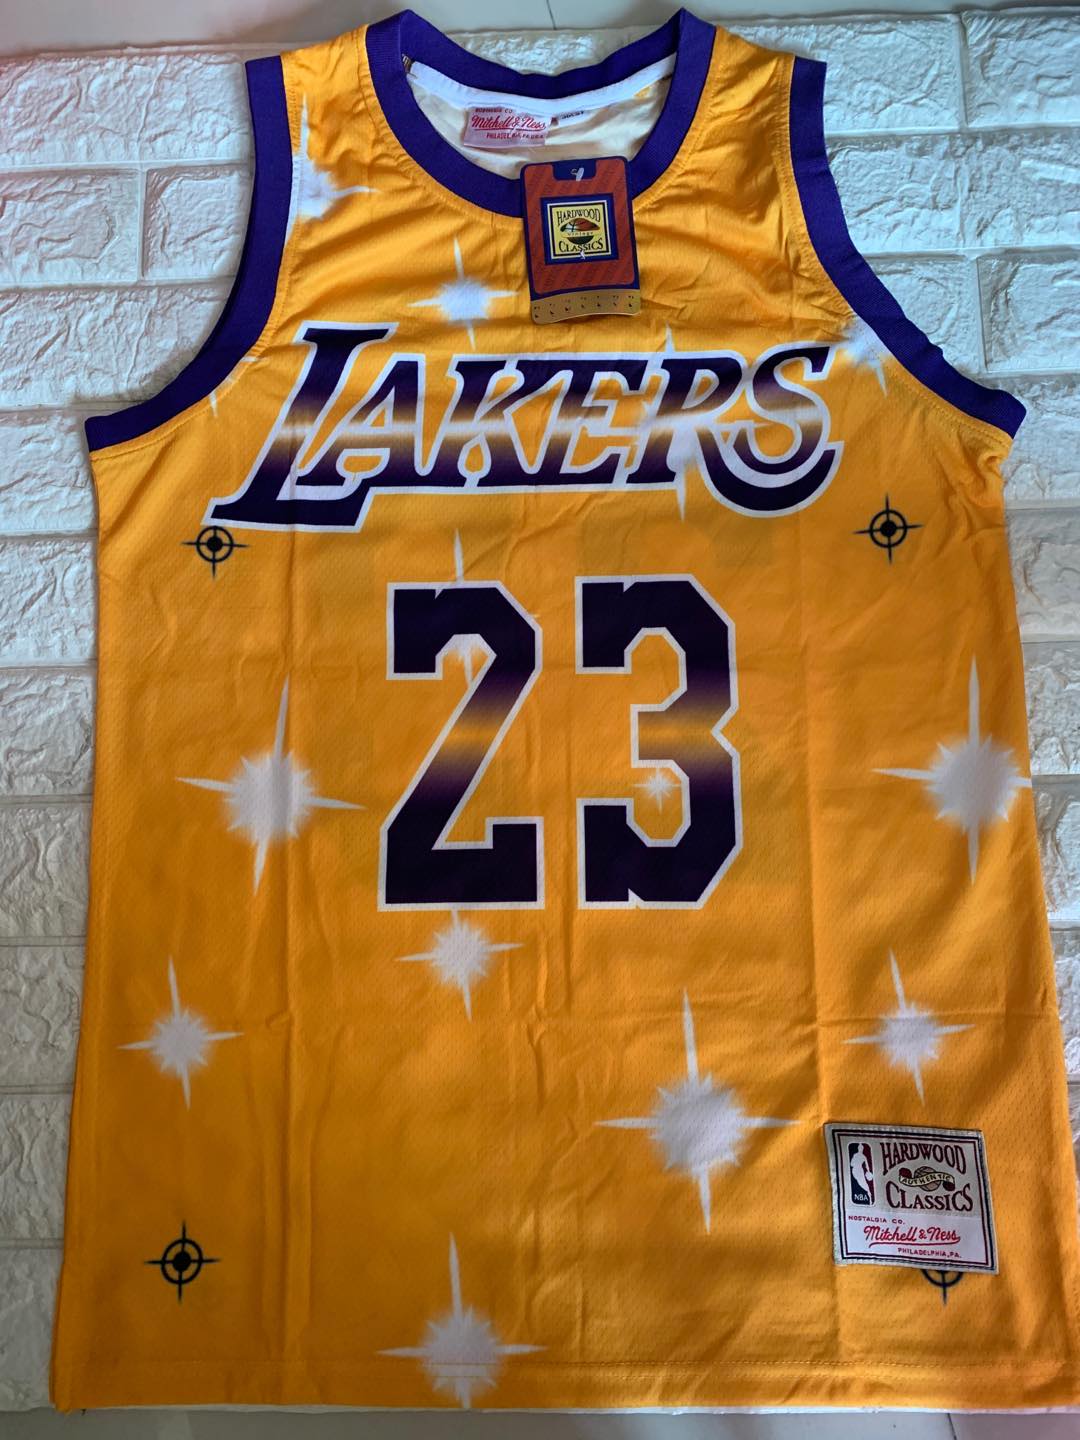 lakers 23 james jersey